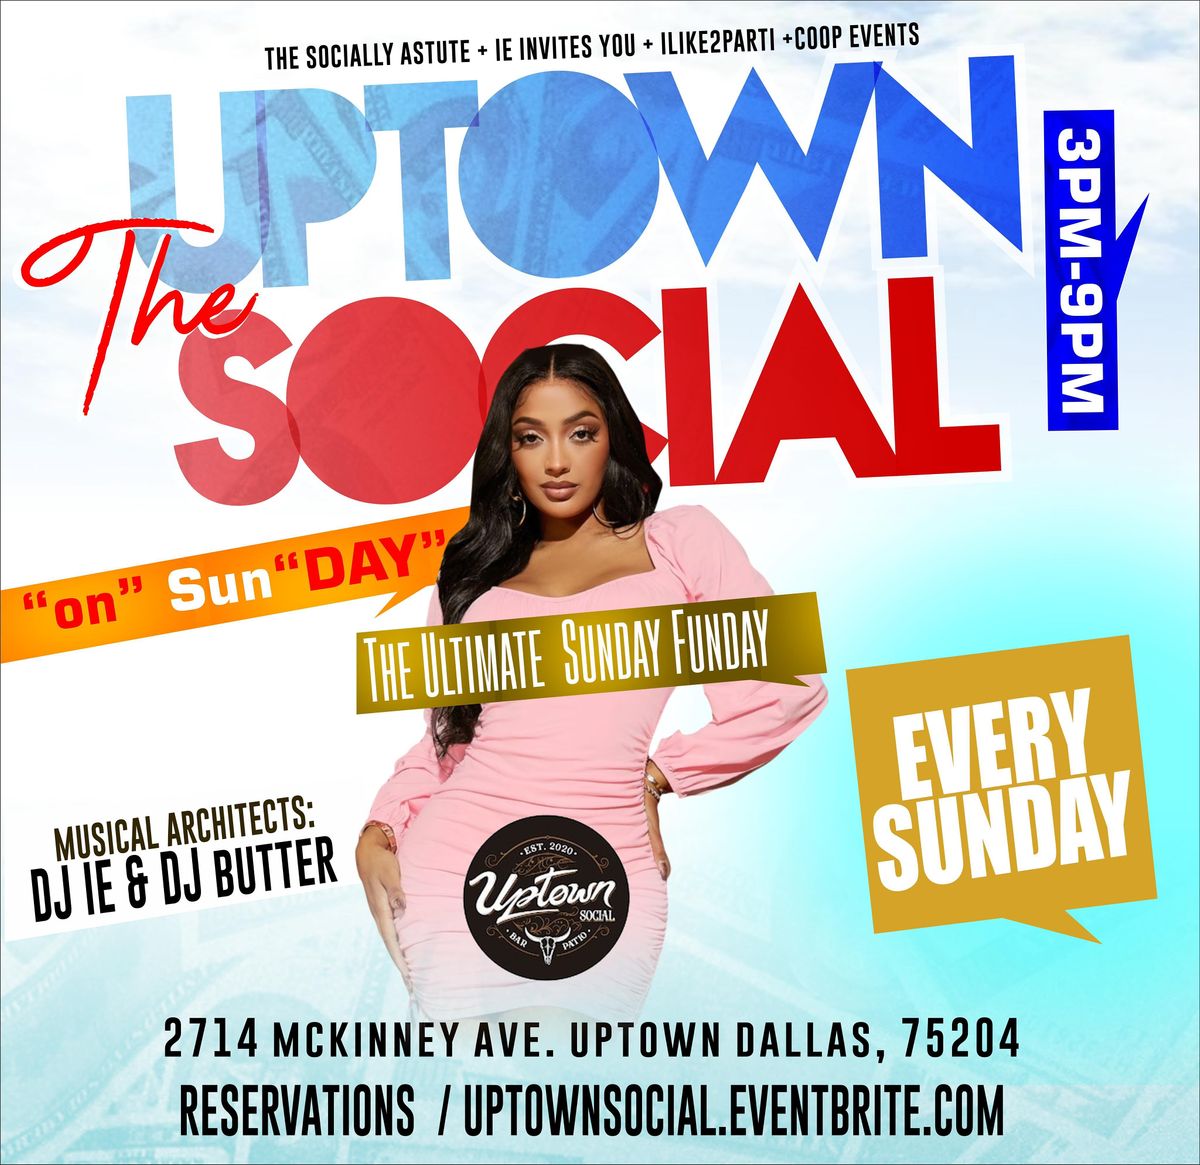 The UPtown Social on Sun"DAY" at UPtown Social